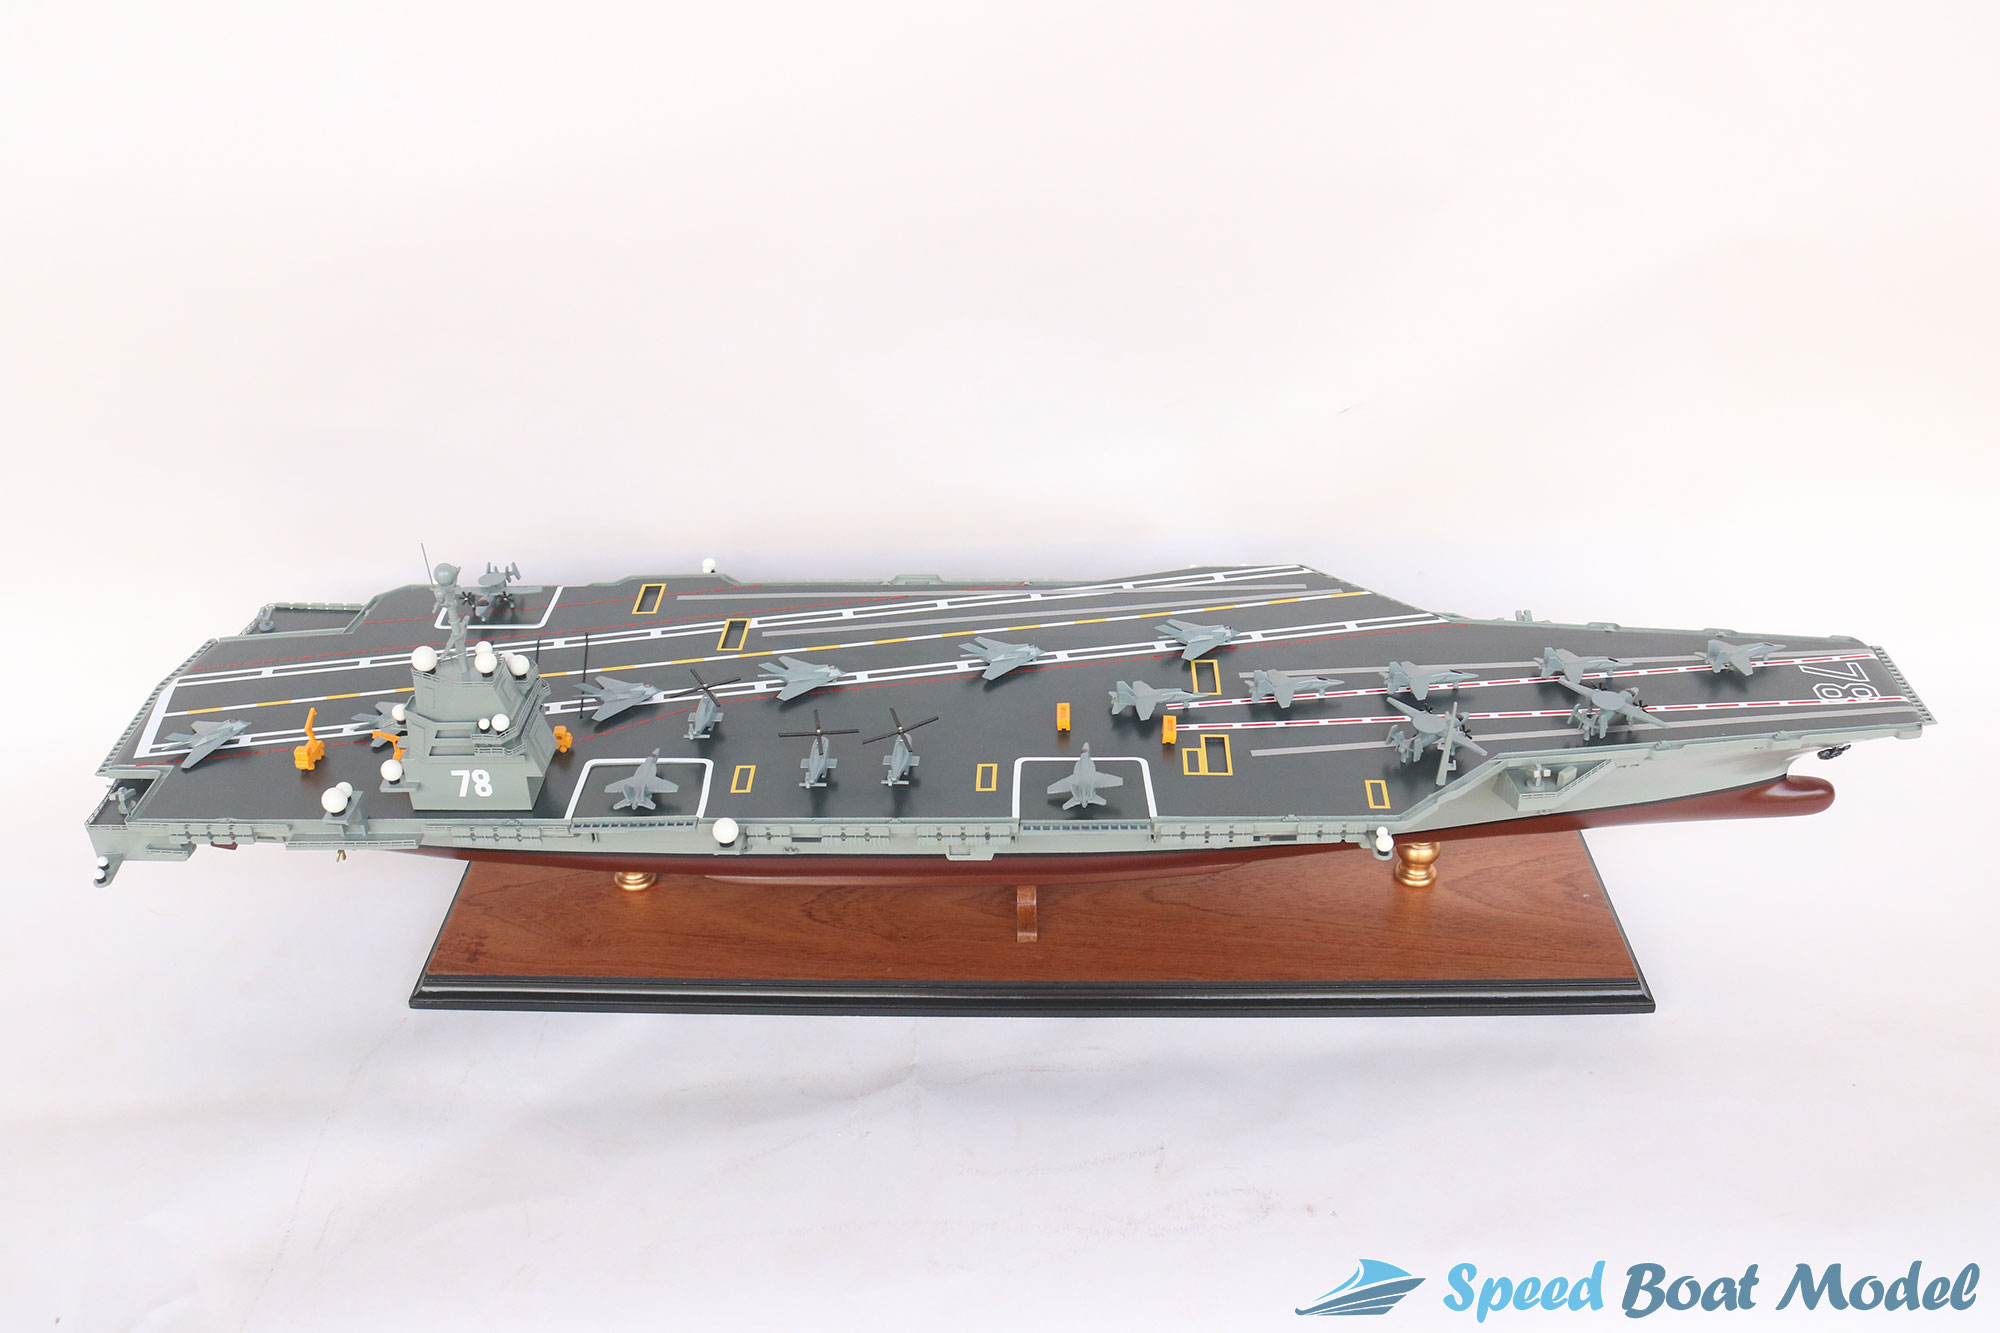 Aircraft Carrier Uss Gerald Ford Warship Model 38"